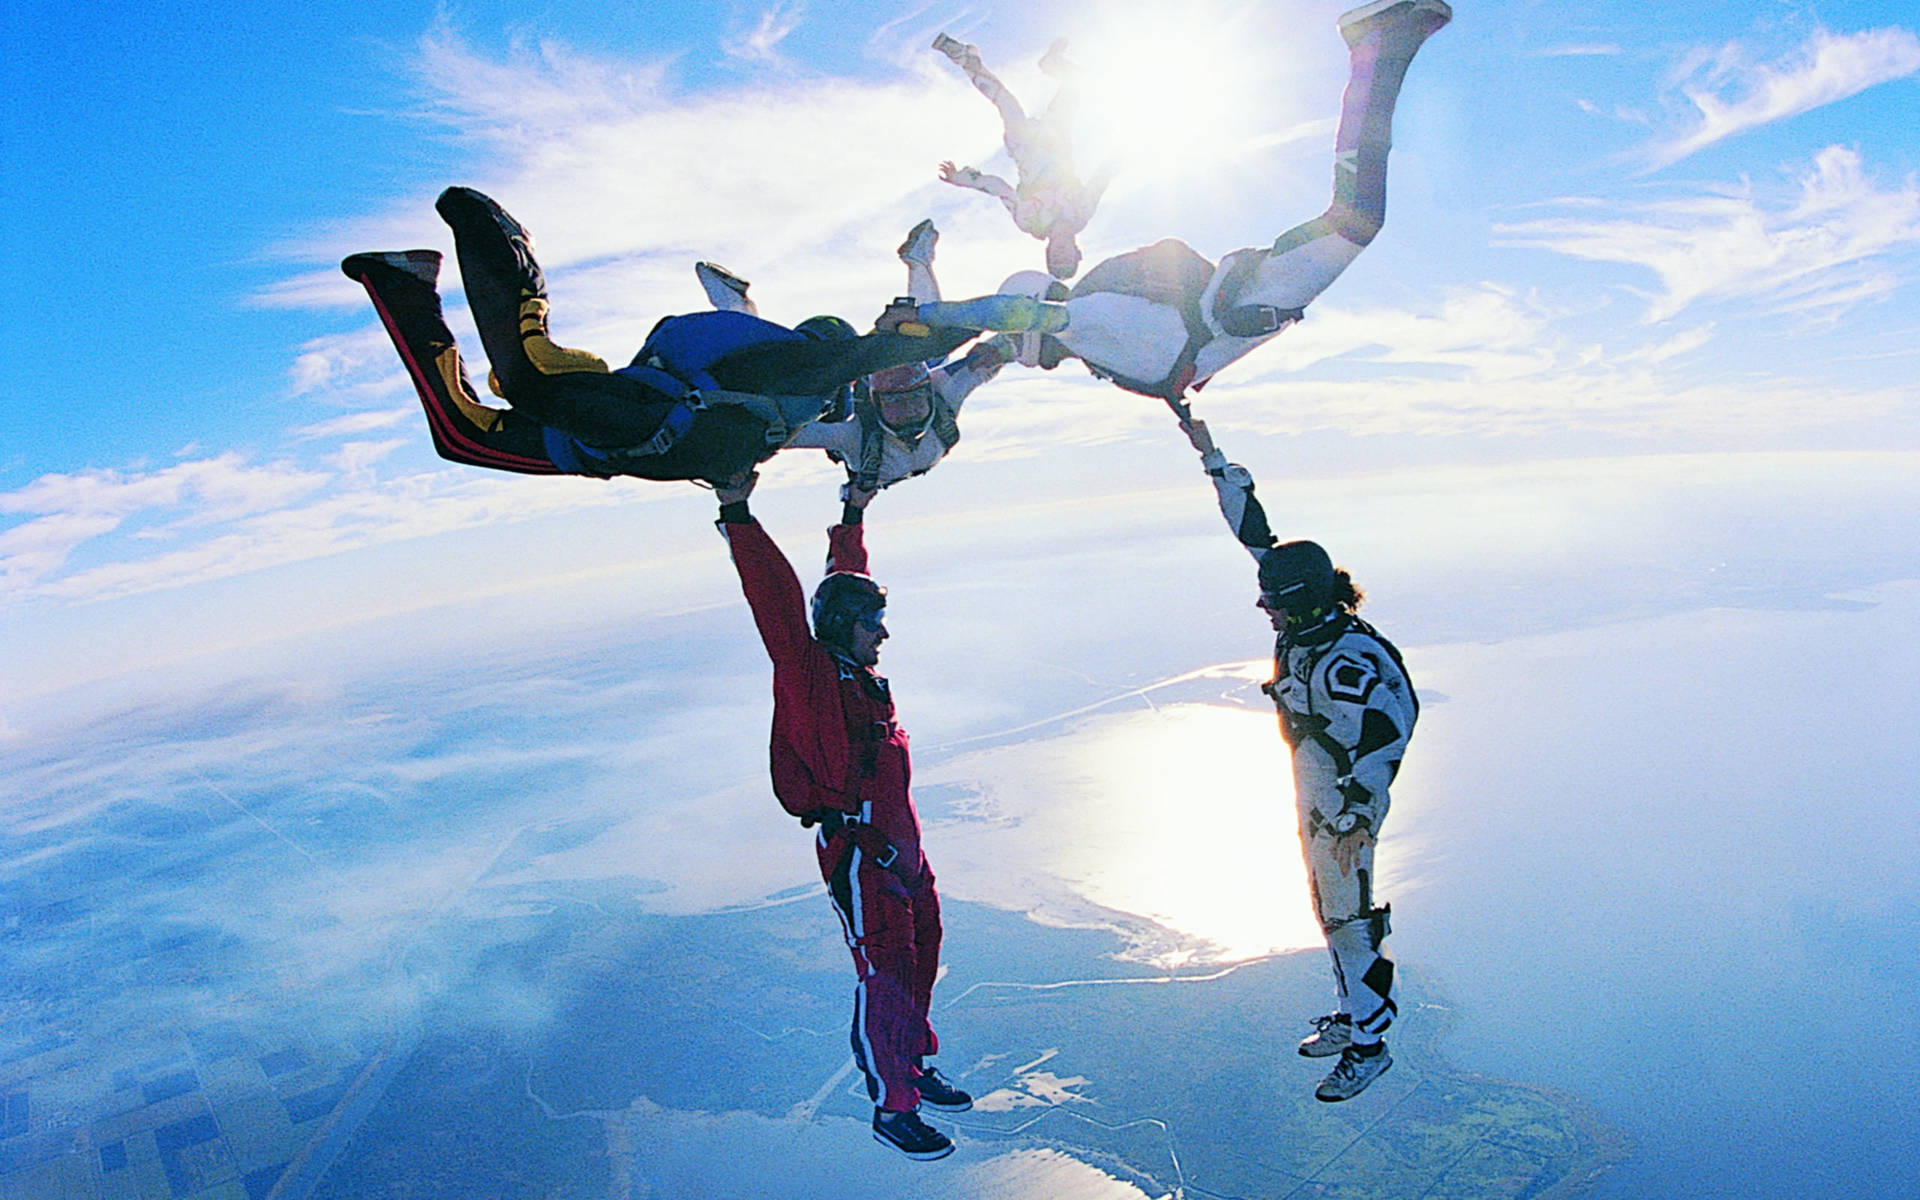 Extreme Sports Formation Skydiving Wallpaper